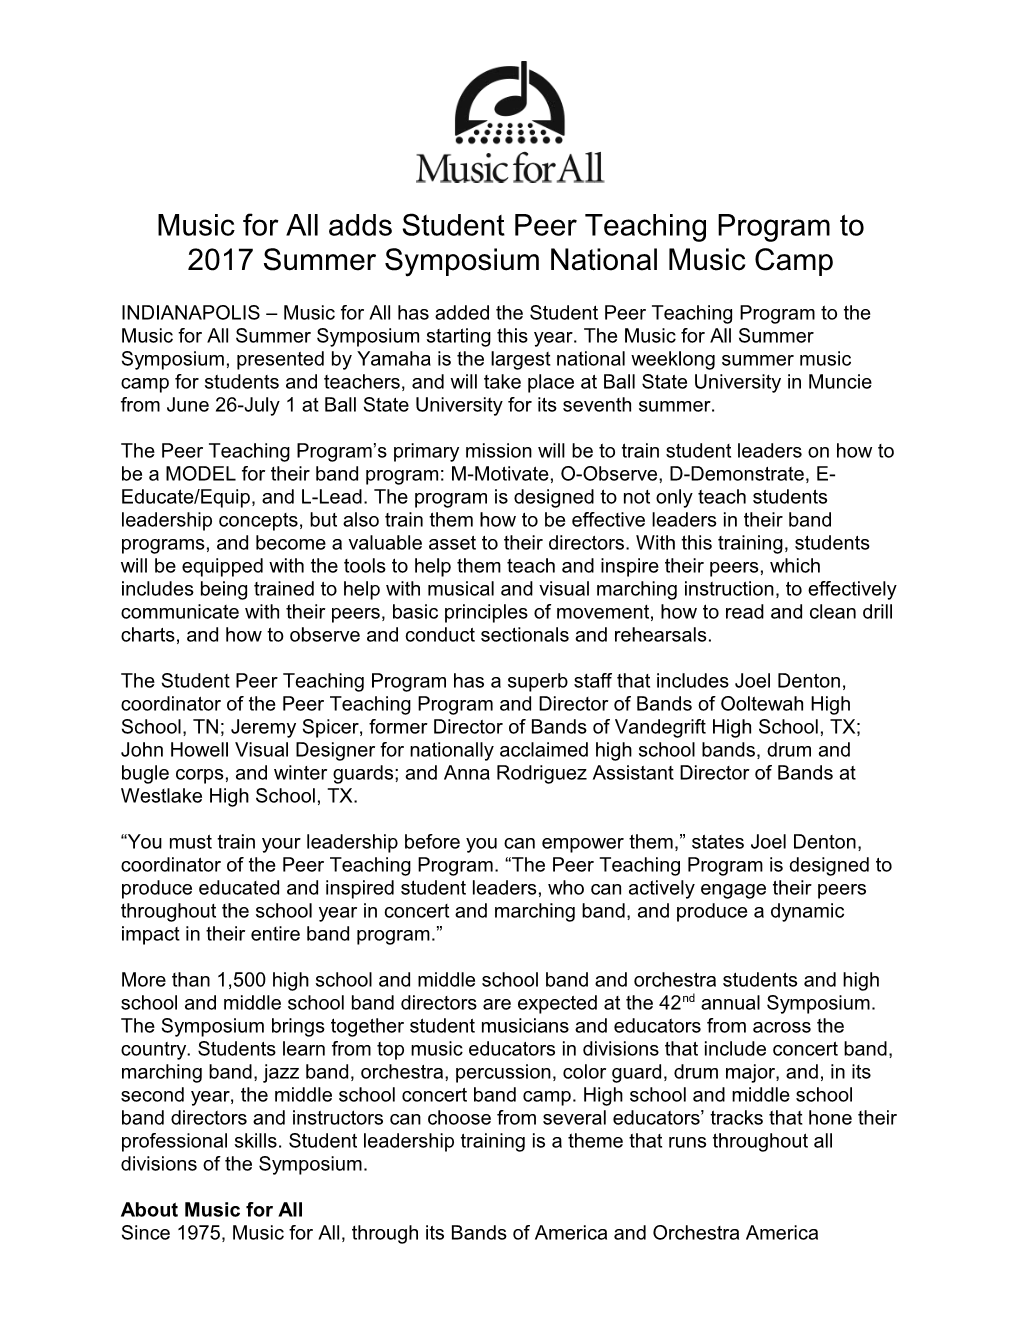 Music for All Adds Student Peer Teaching Program to 2017 Summer Symposium National Music Camp